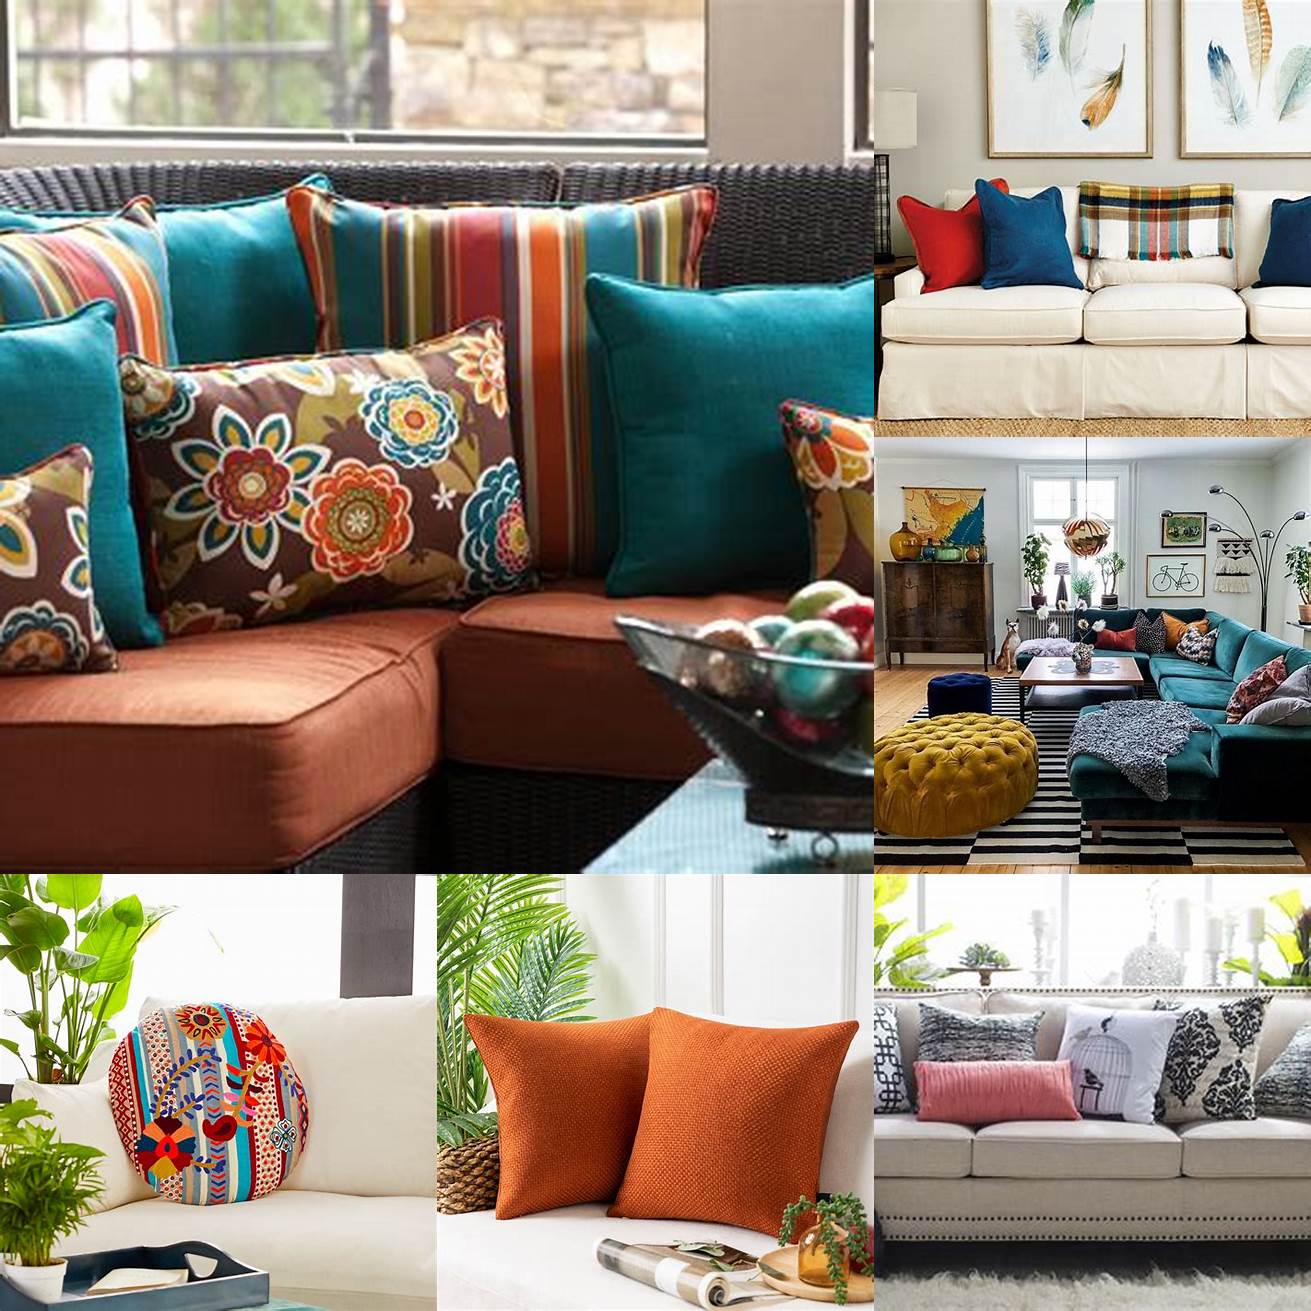 1 Add colorful accent pillows and throws for a cozy feel